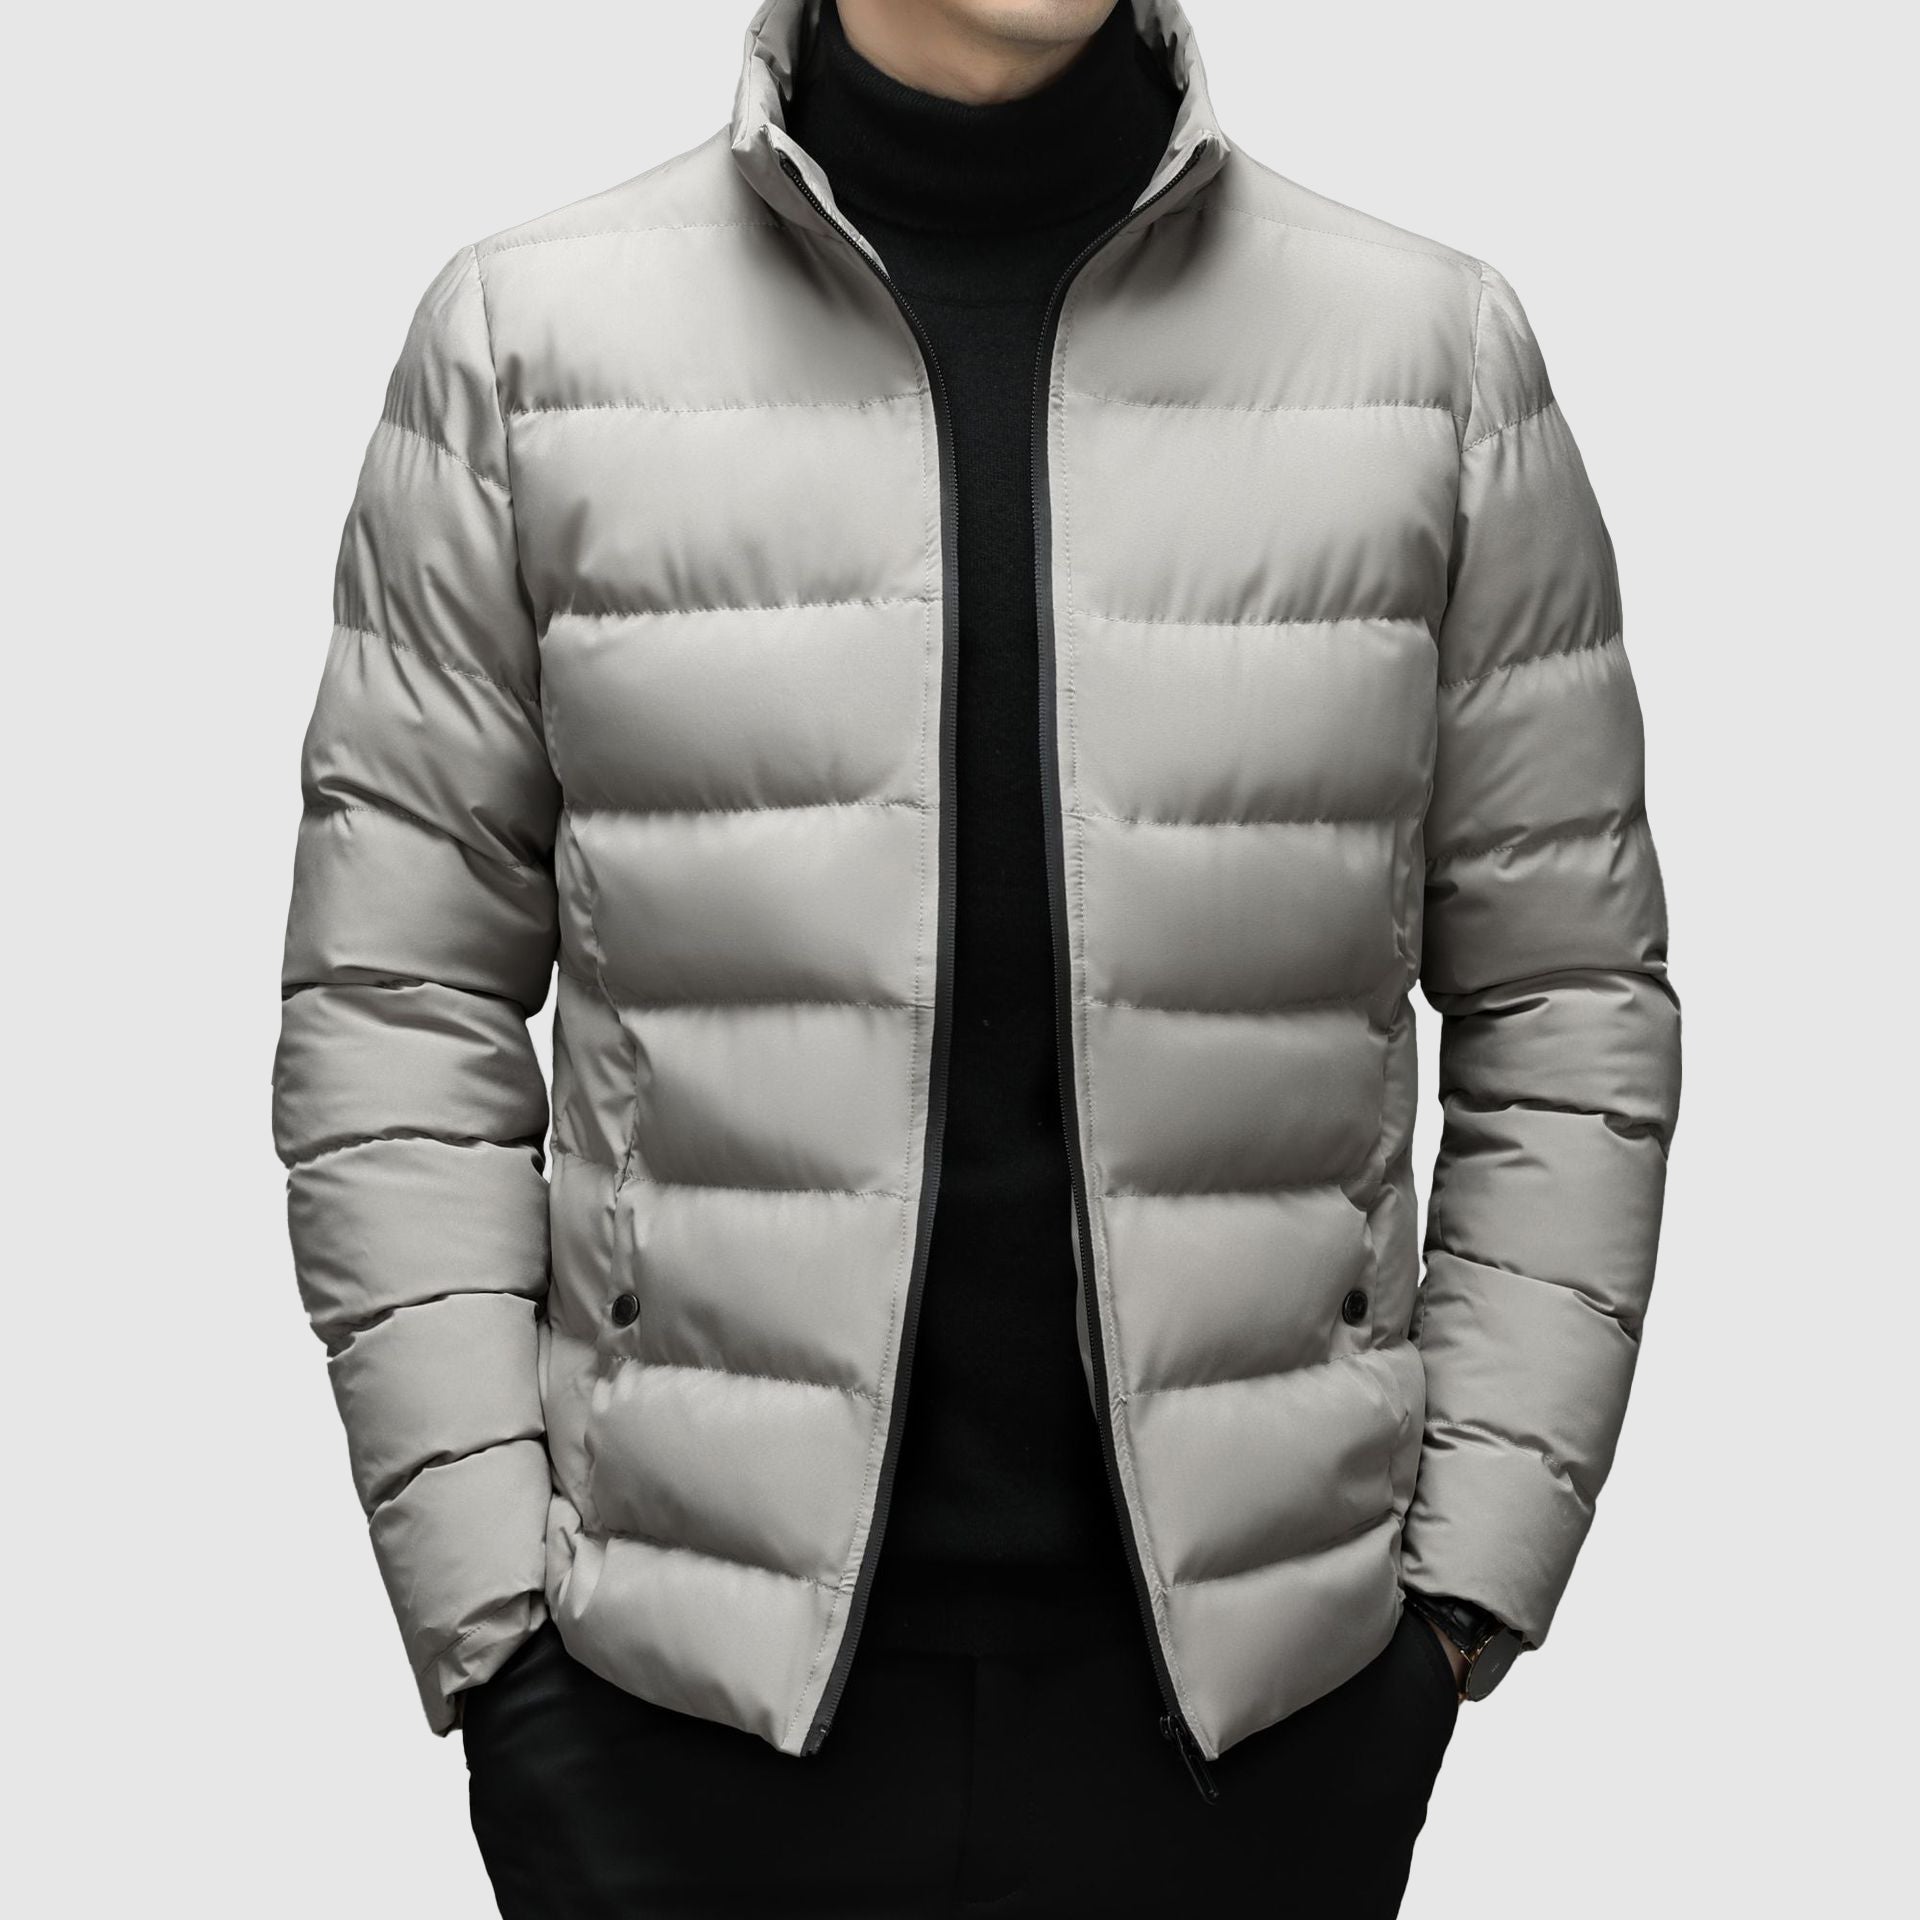 Dan Anthony Business Down Jacket